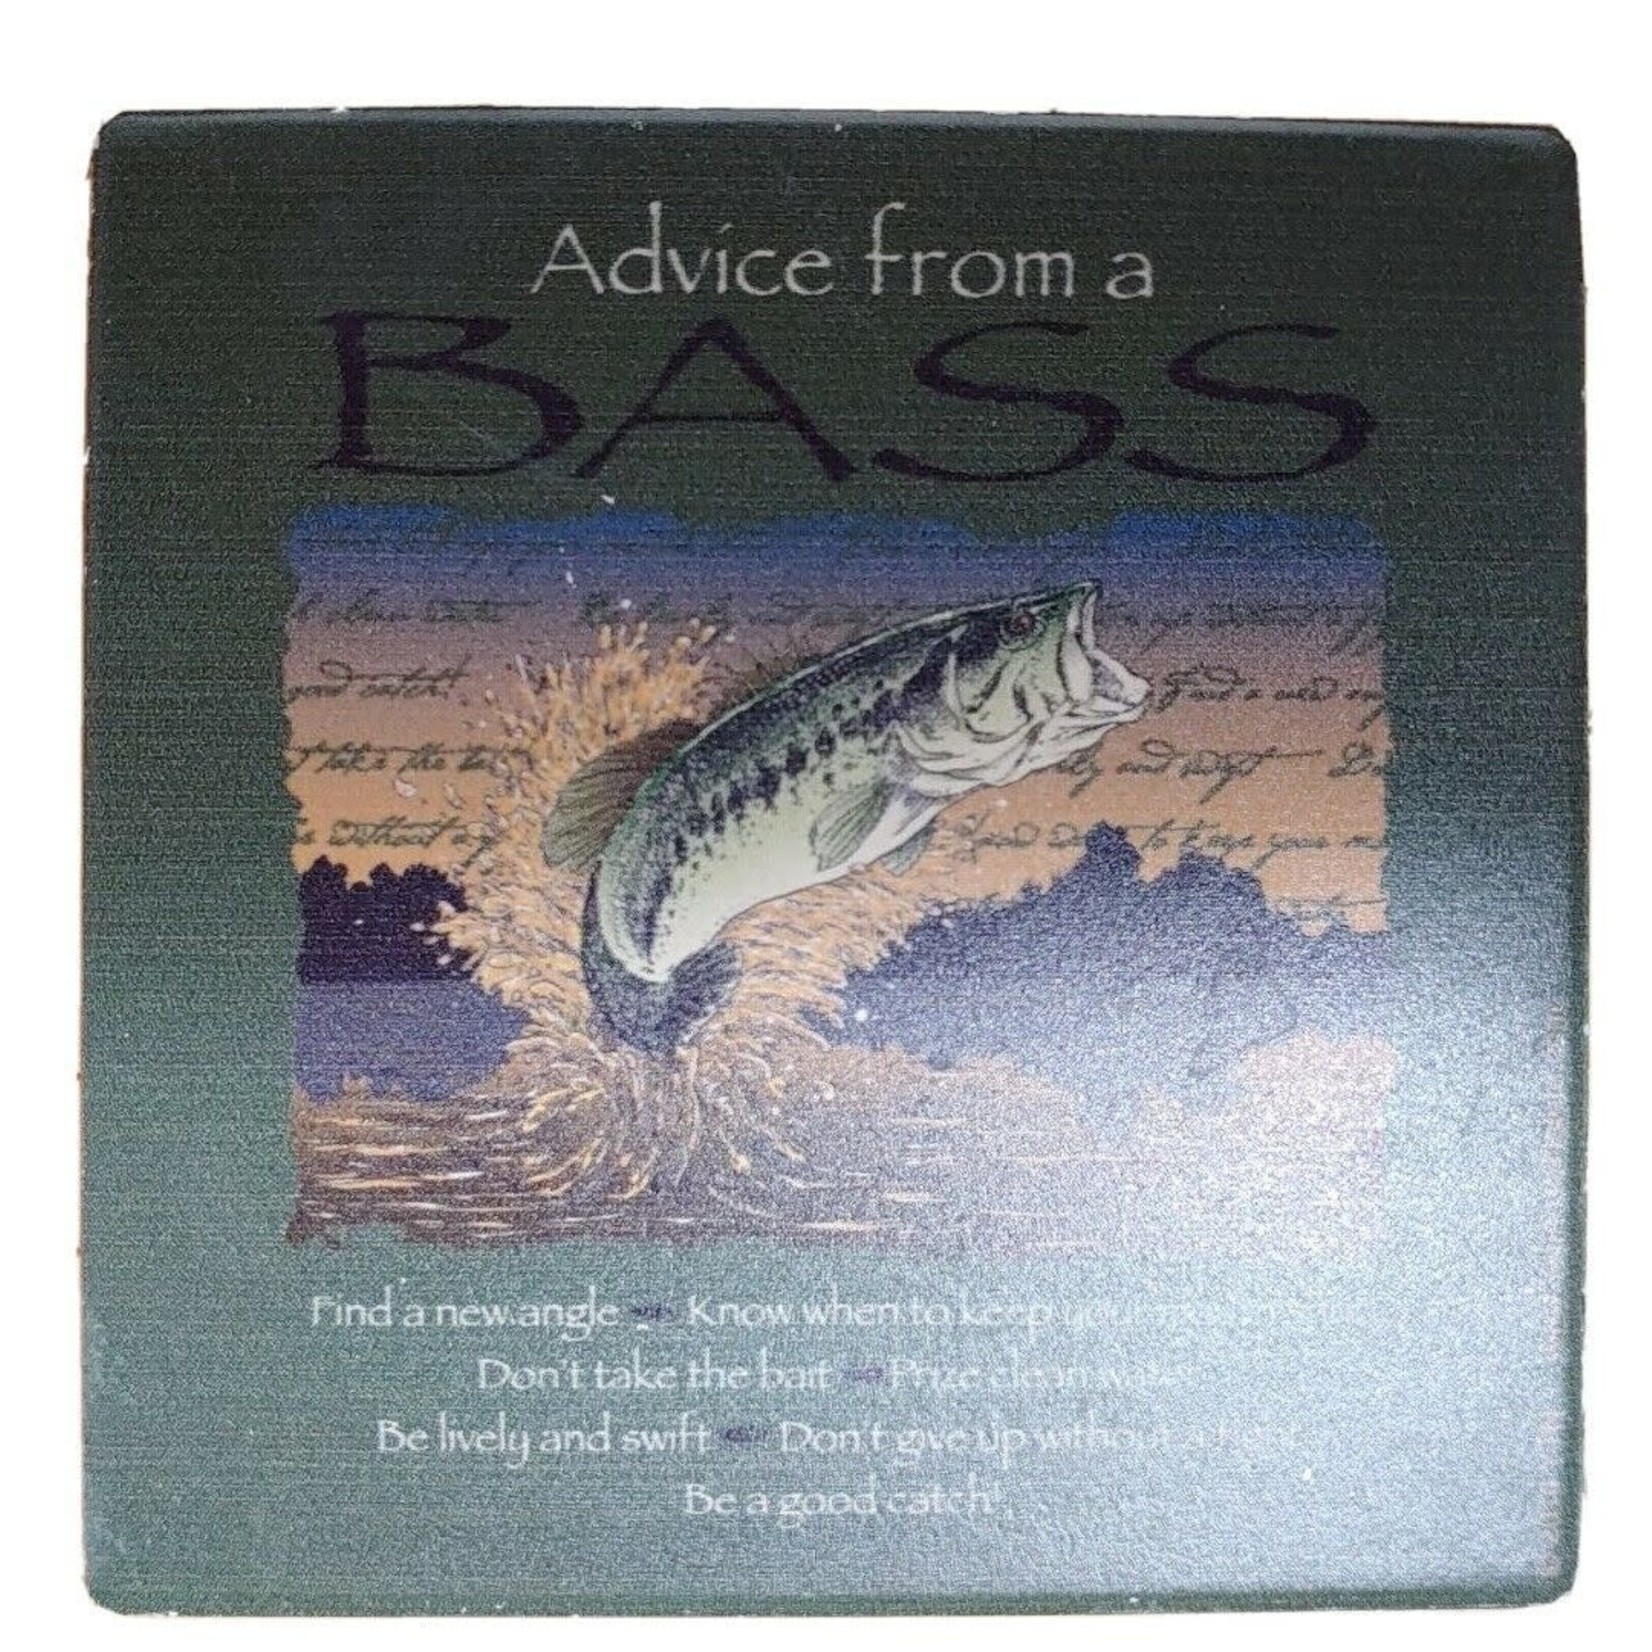 Advice from a Bass coaster